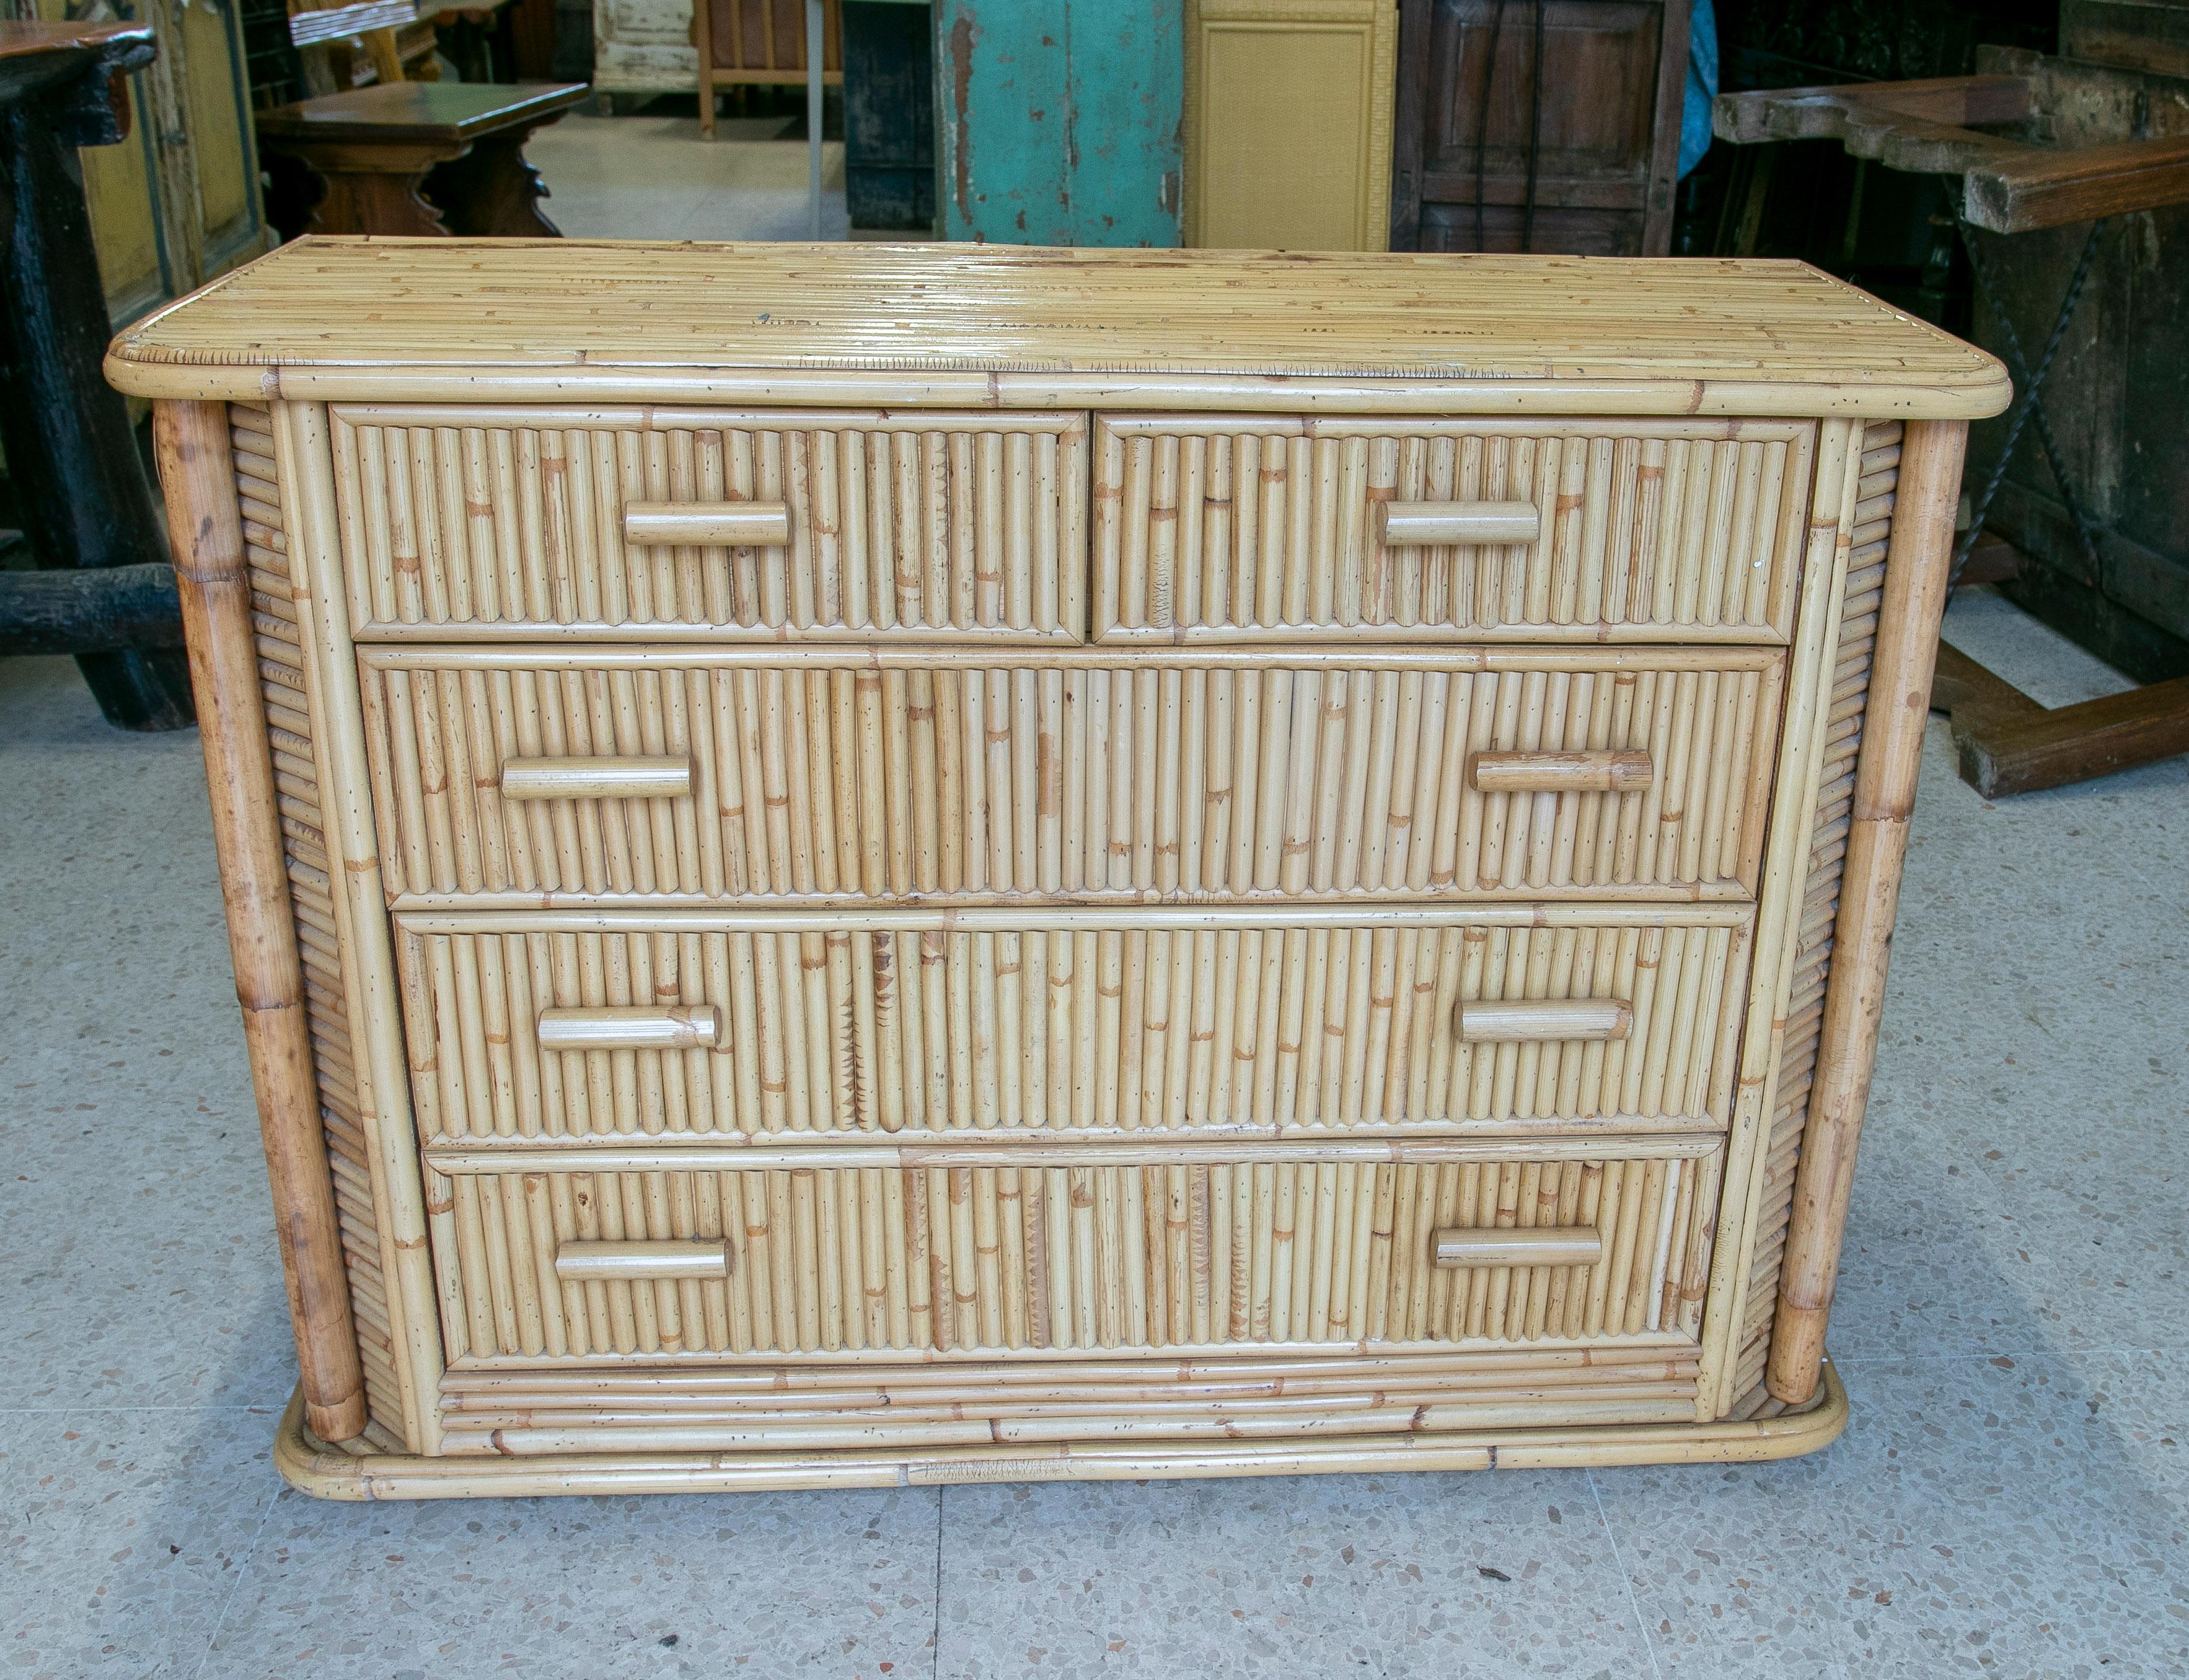 Vintage 1970s Spanish 5-drawer bamboo lined wooden chest.